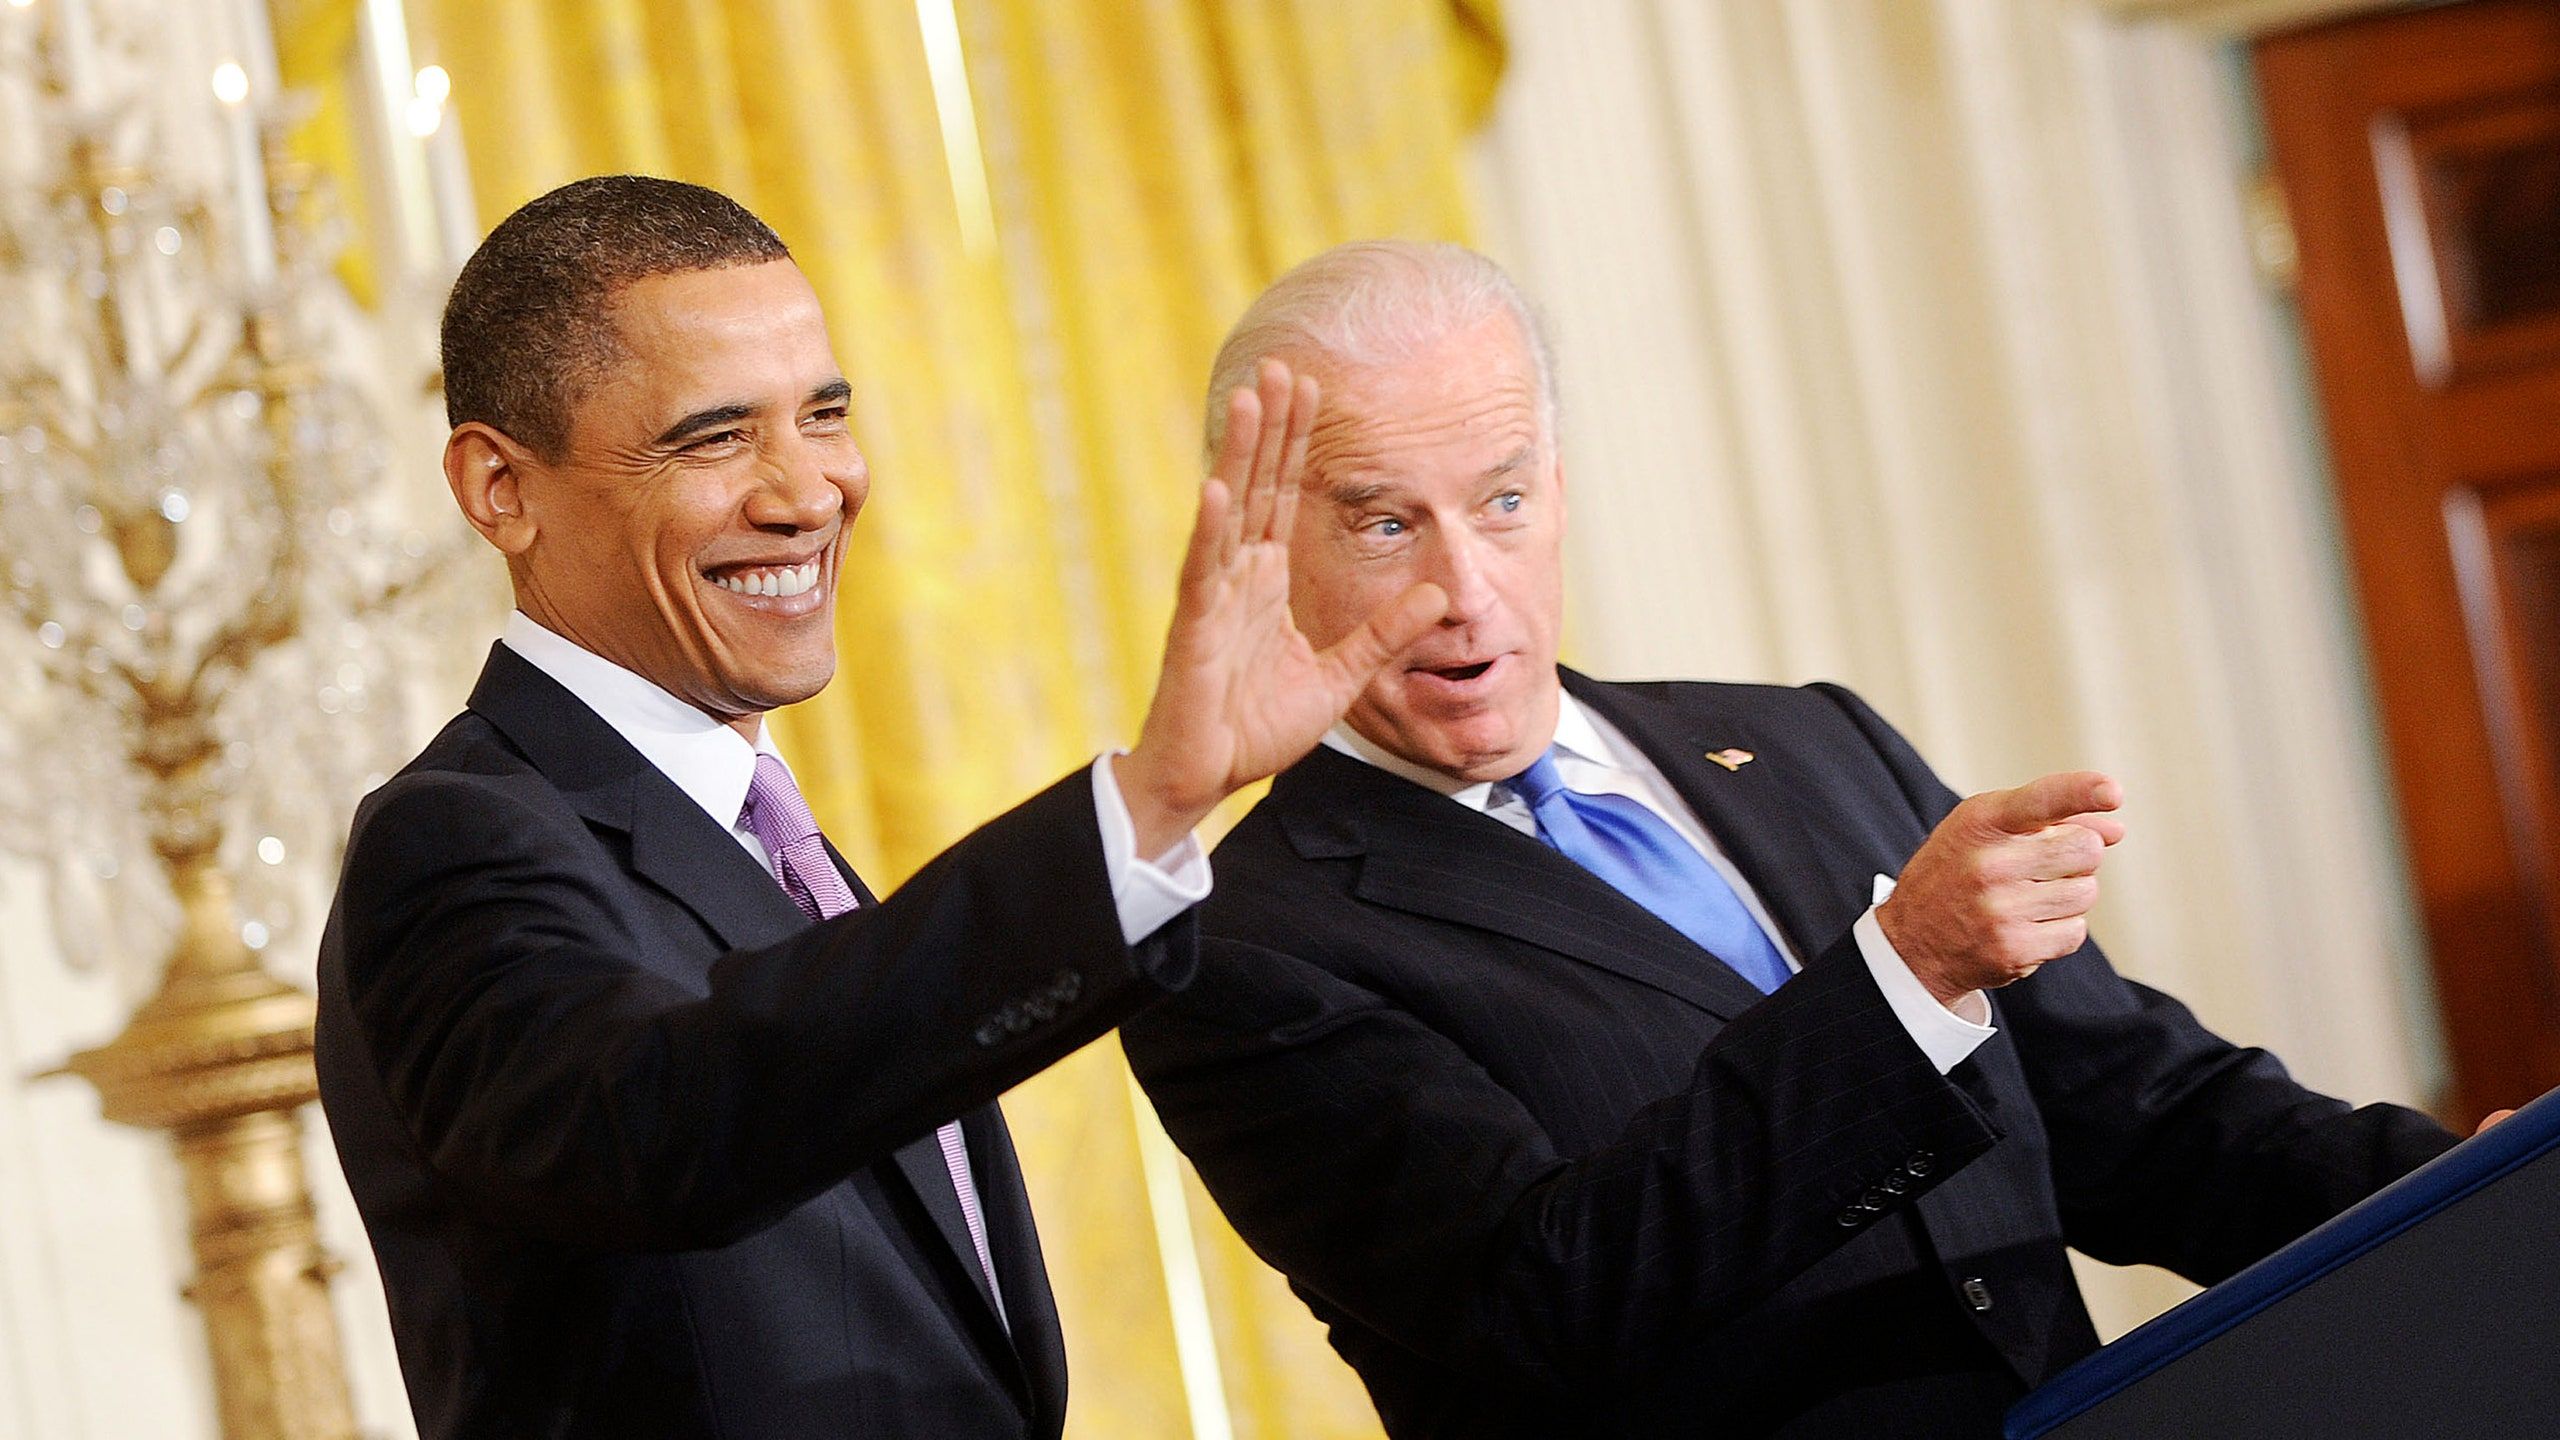 Obama Repeatedly Tried to Get Biden Not to Run for President